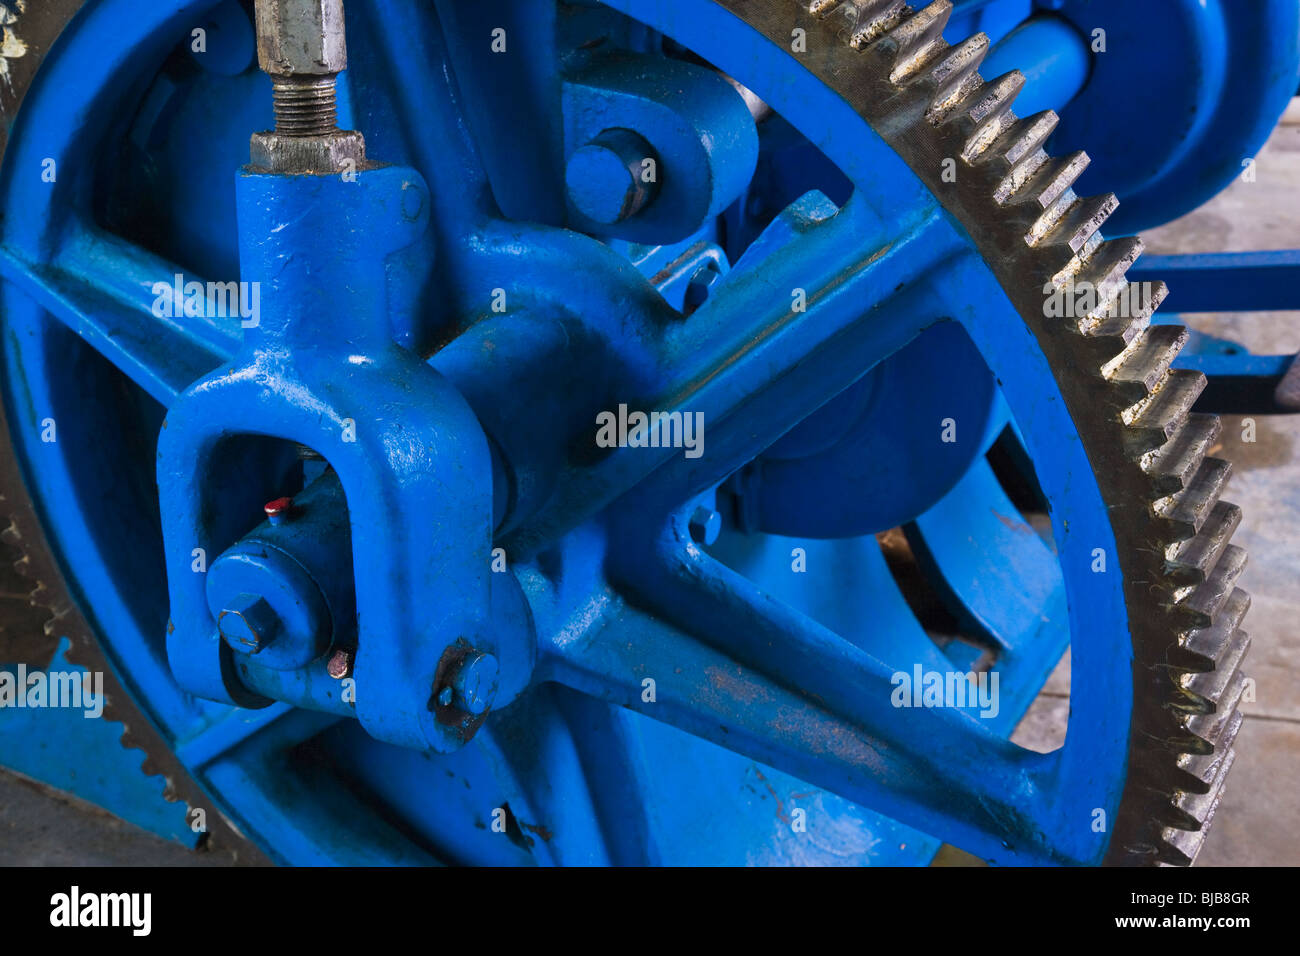 Gear wheel from old die cutting machine at print shop. Stock Photo